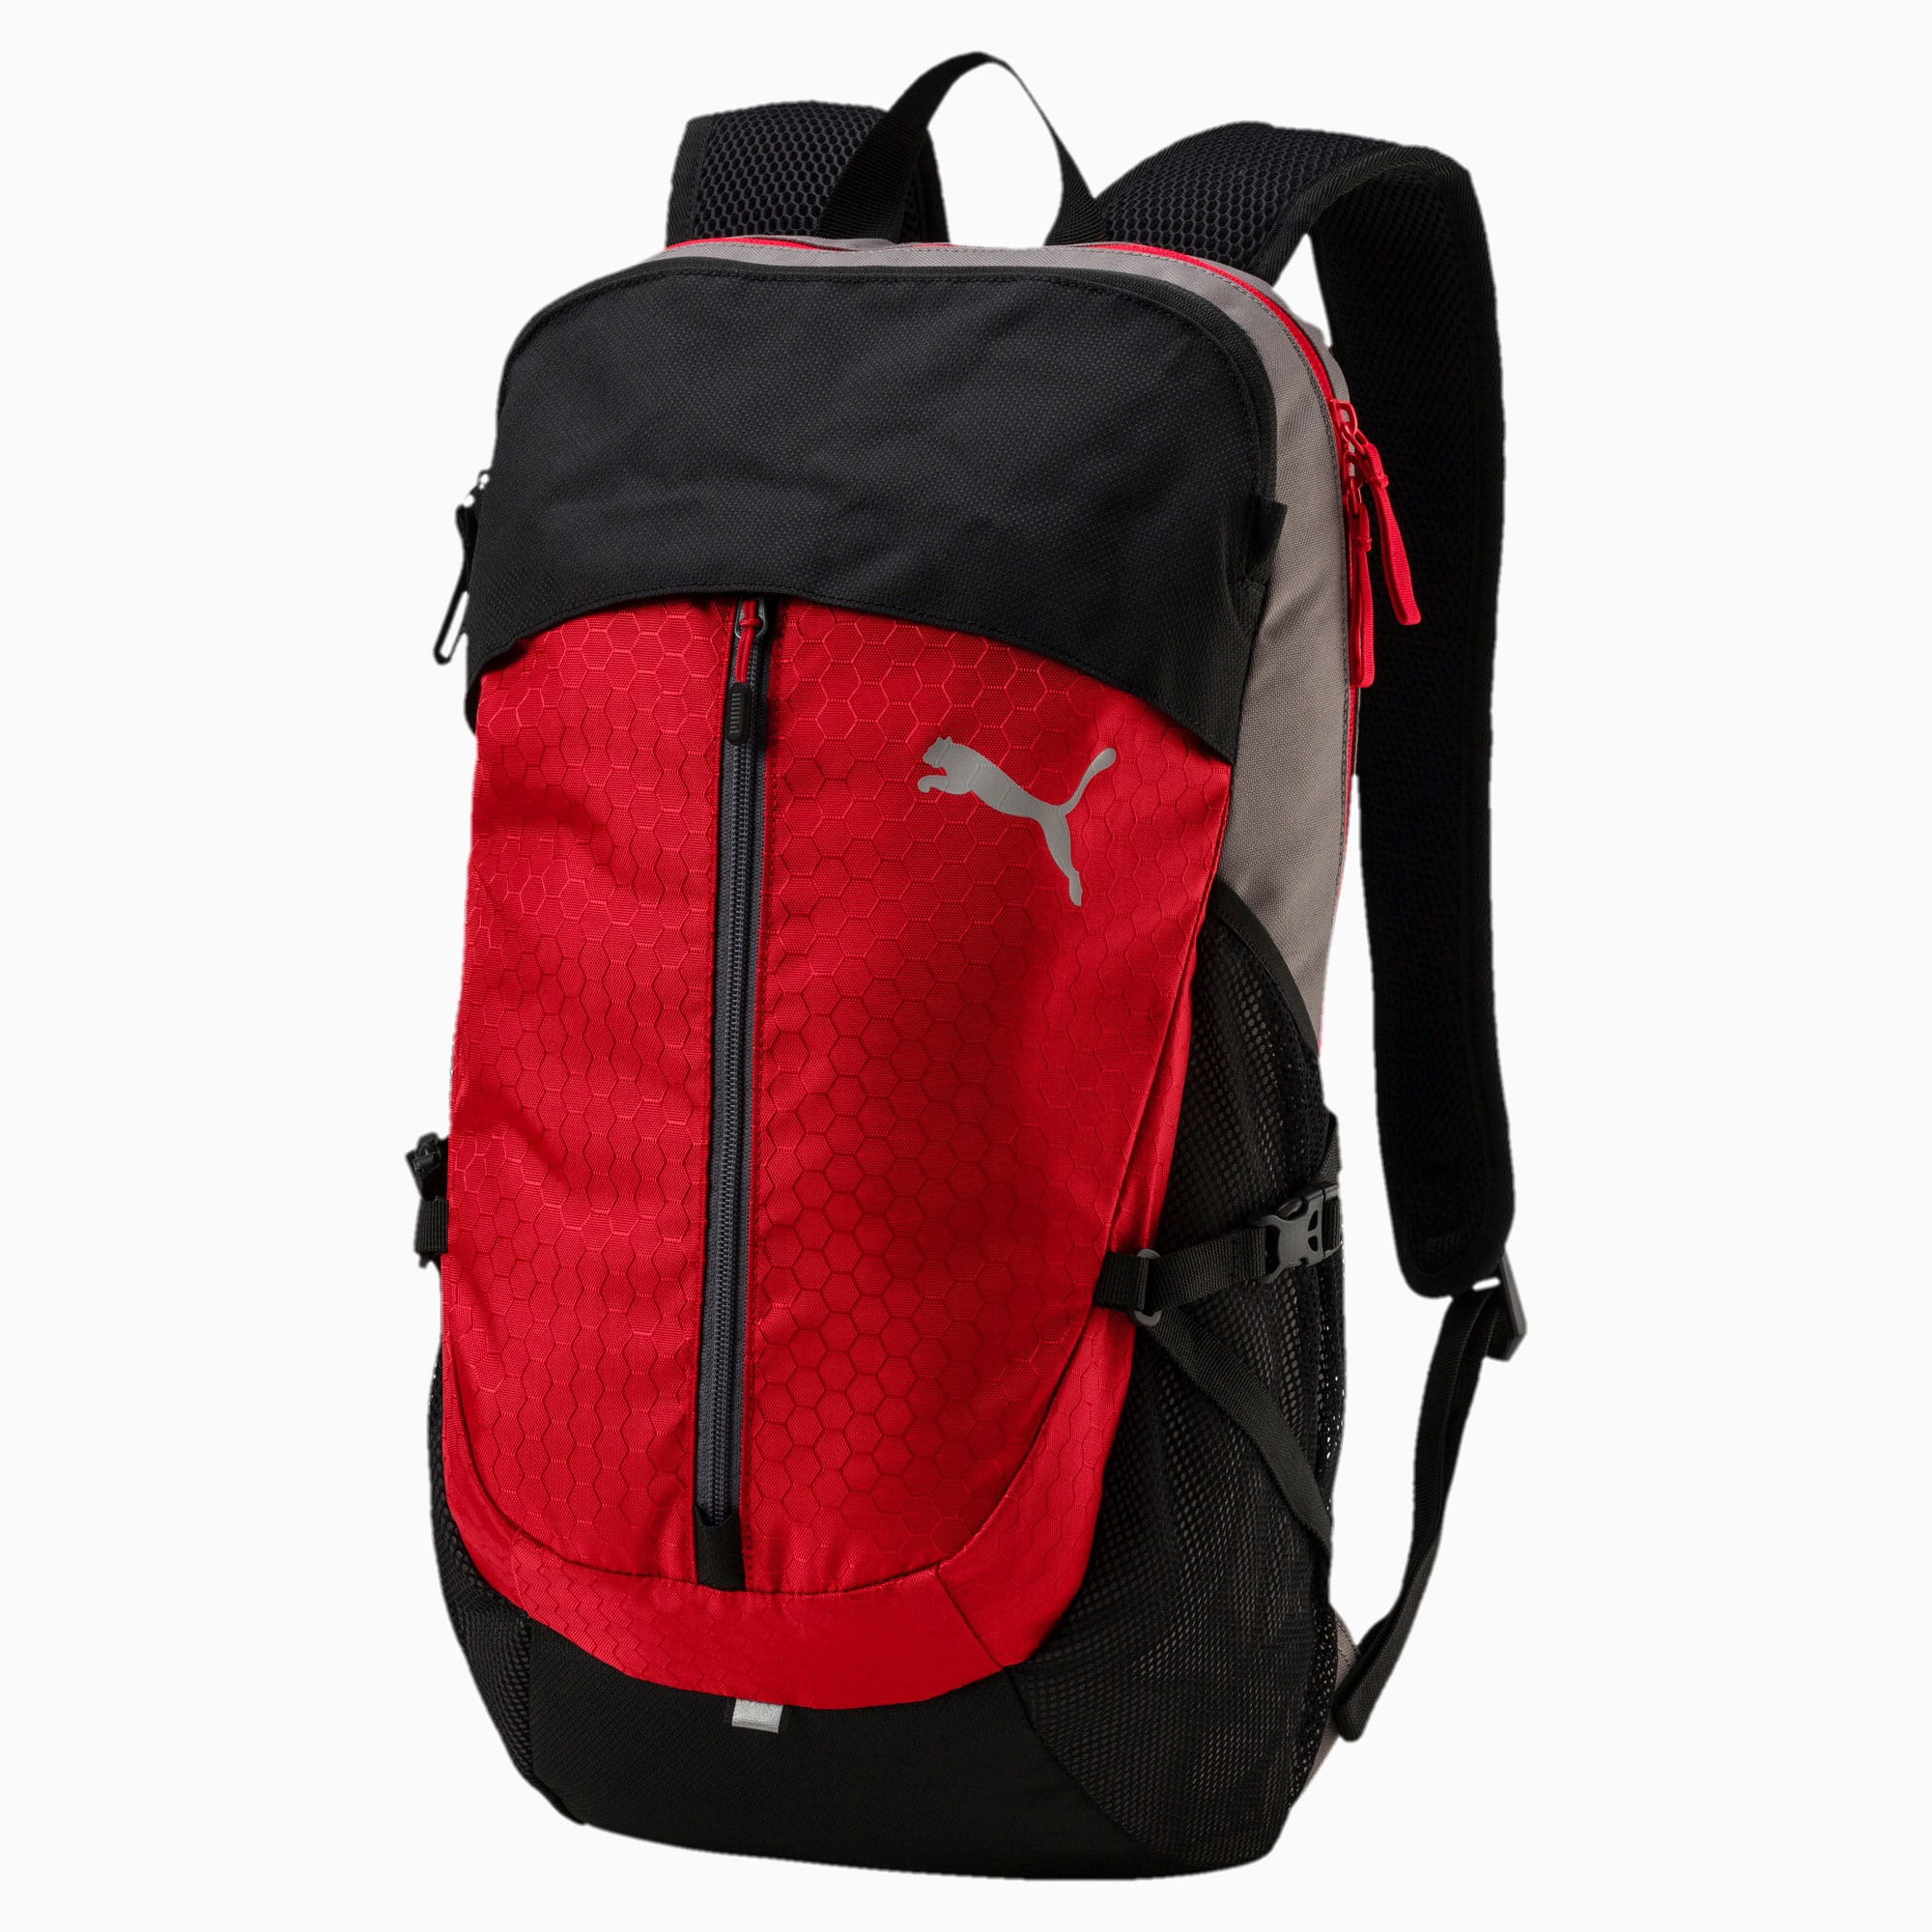 Apex Backpack | Ribbon Red-Steel Gray 